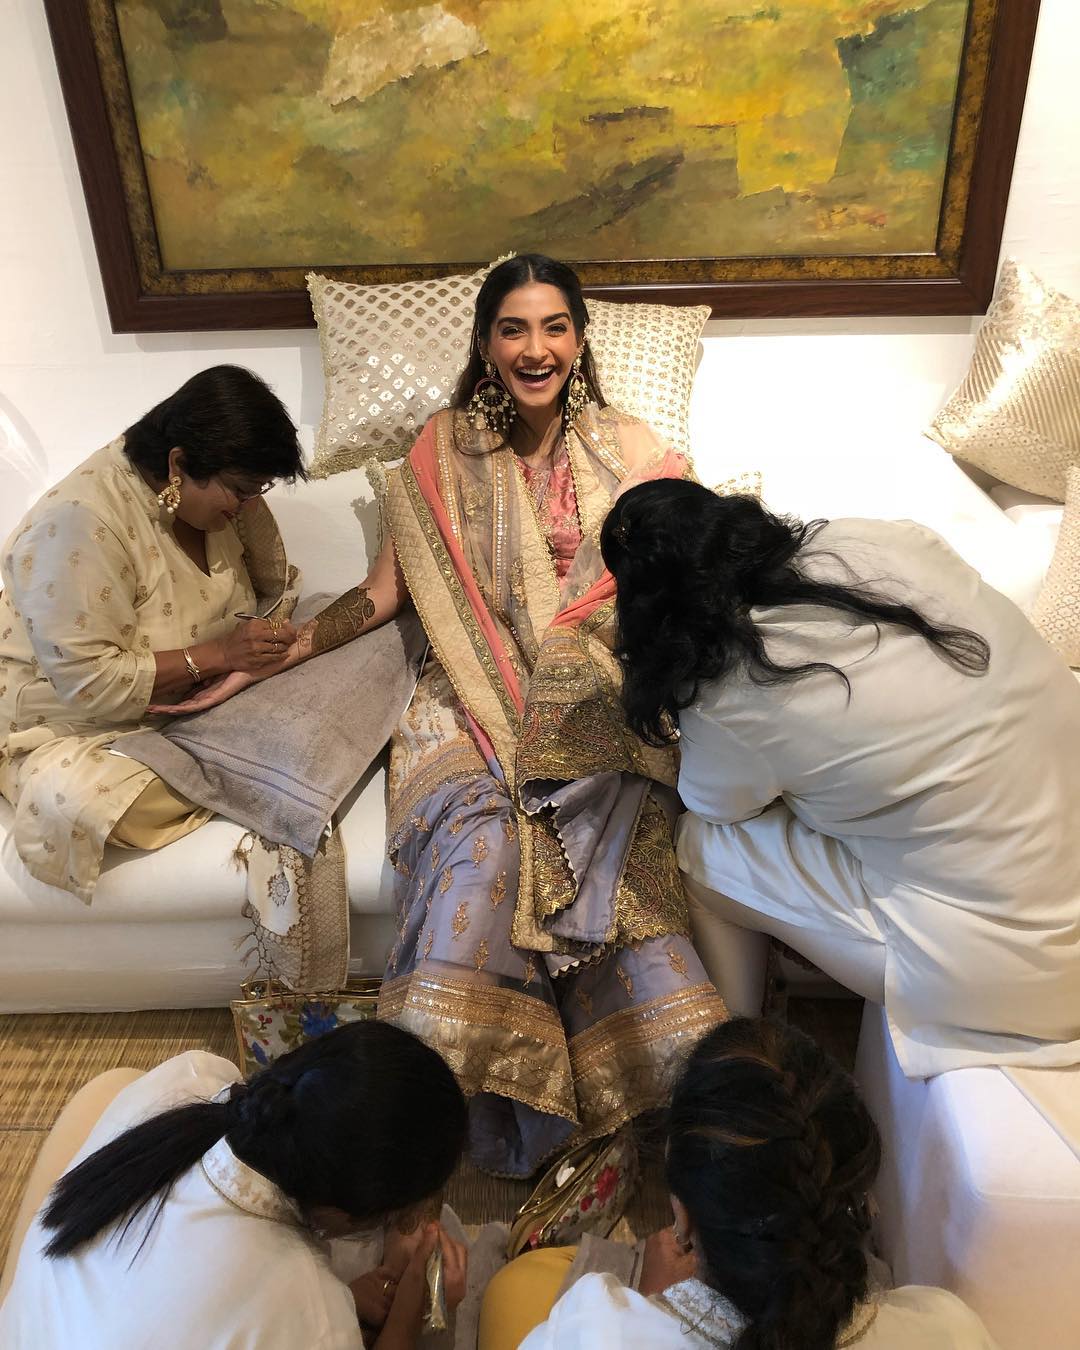 Sonam Kapoor had an intimate yet grand wedding in Mumbai. The actress tied the knot with Anand Ahuja. For her beautiful Mehendi, Sonam wore a sharara set. The actress paired a lilac sharara with a cream kurta and matching dupatta. Her big earrings were the highlight of her look